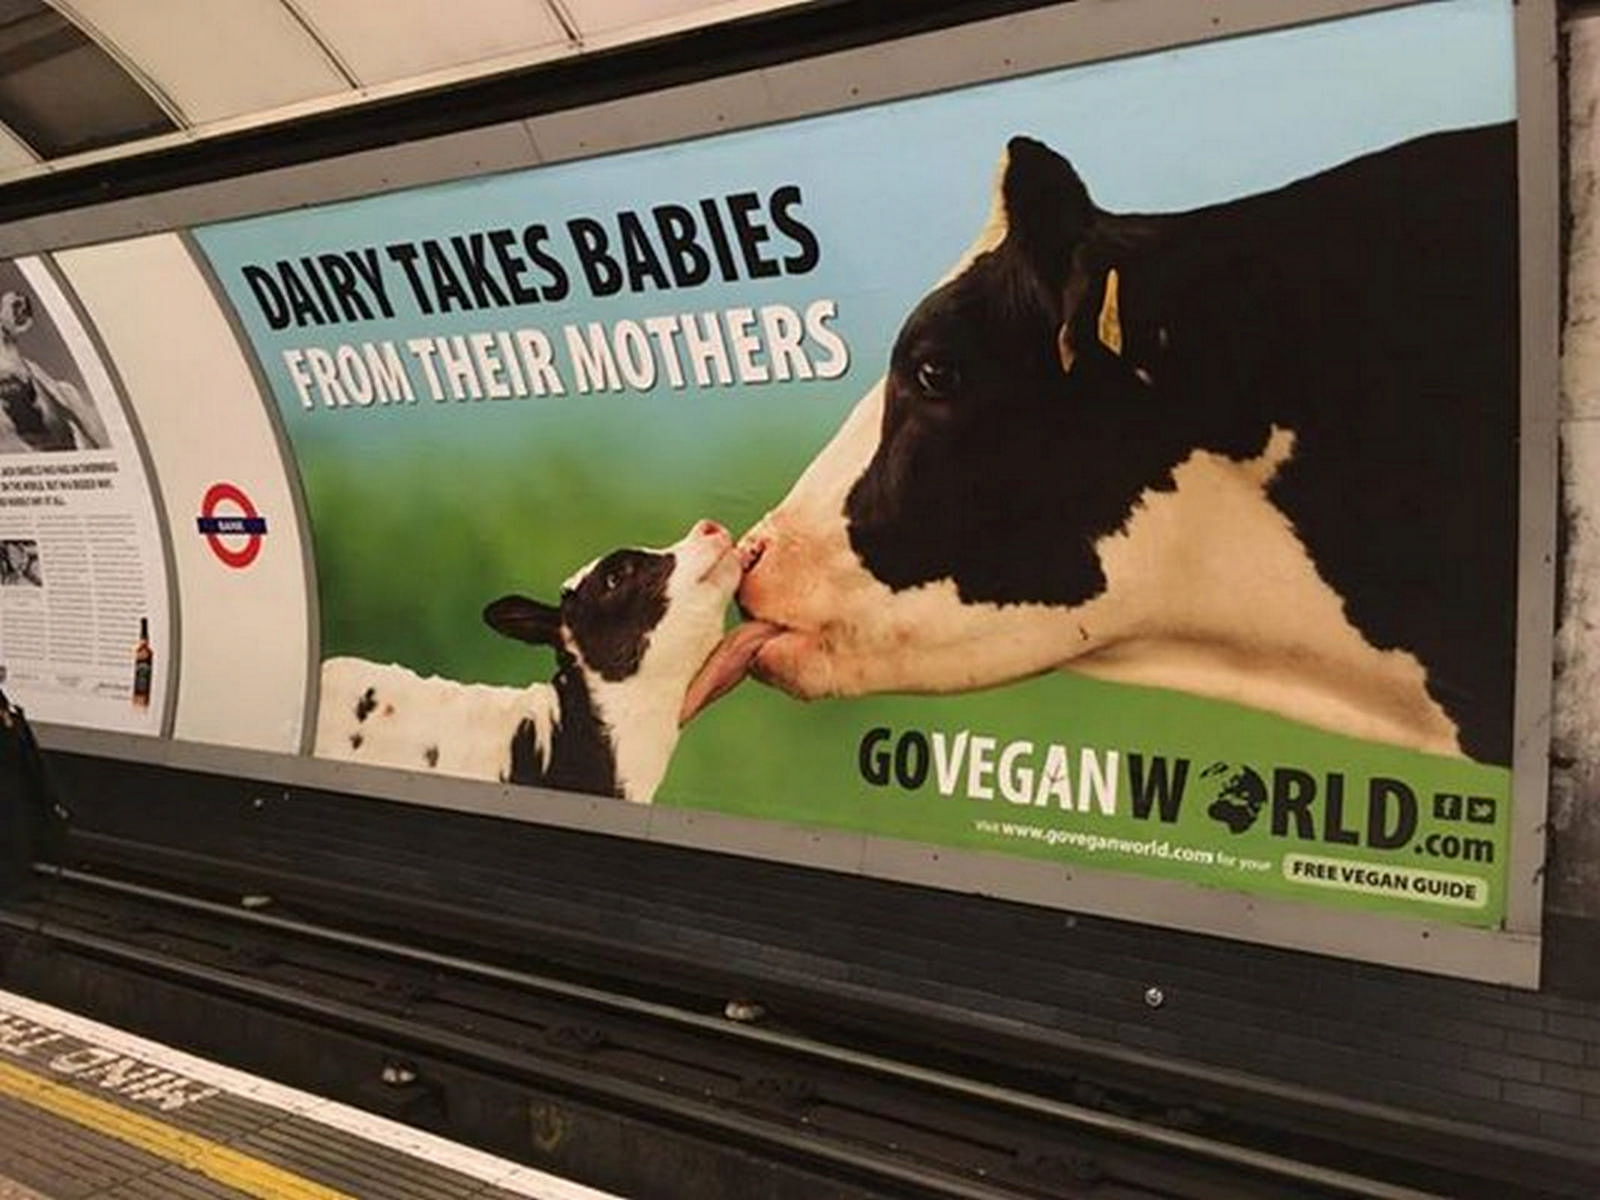 Go Vegan World - Dairy Takes babies From Their Mothers